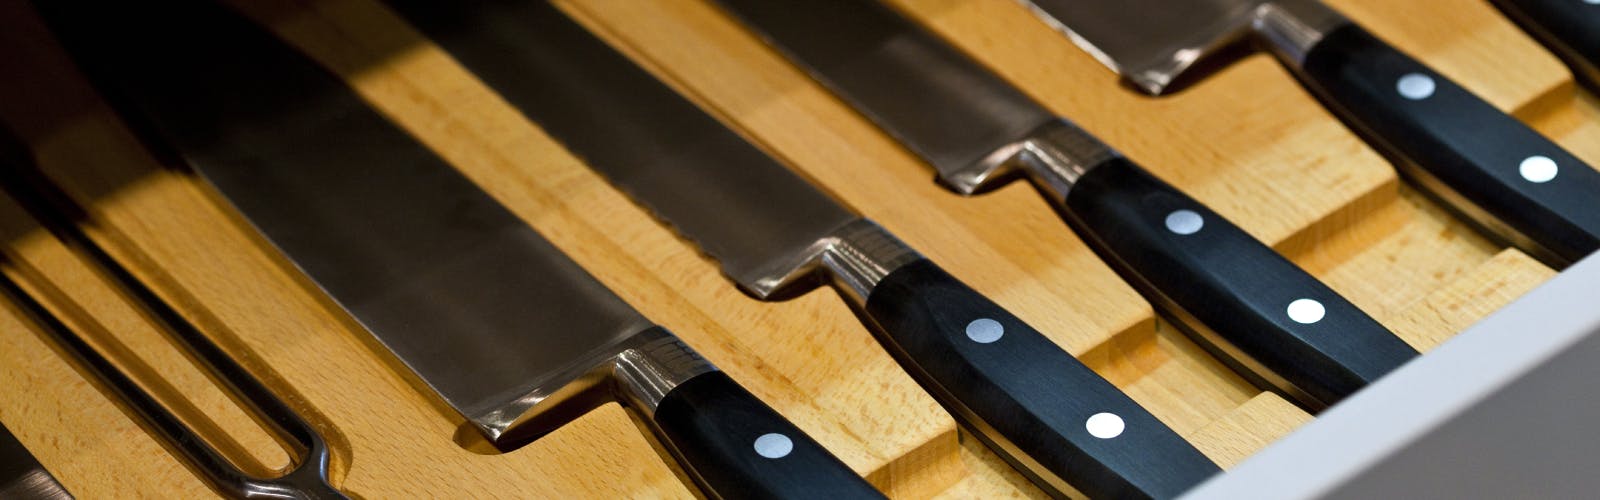 An Expert Guide to Great Knife Sets: Find the Best Knife Sets